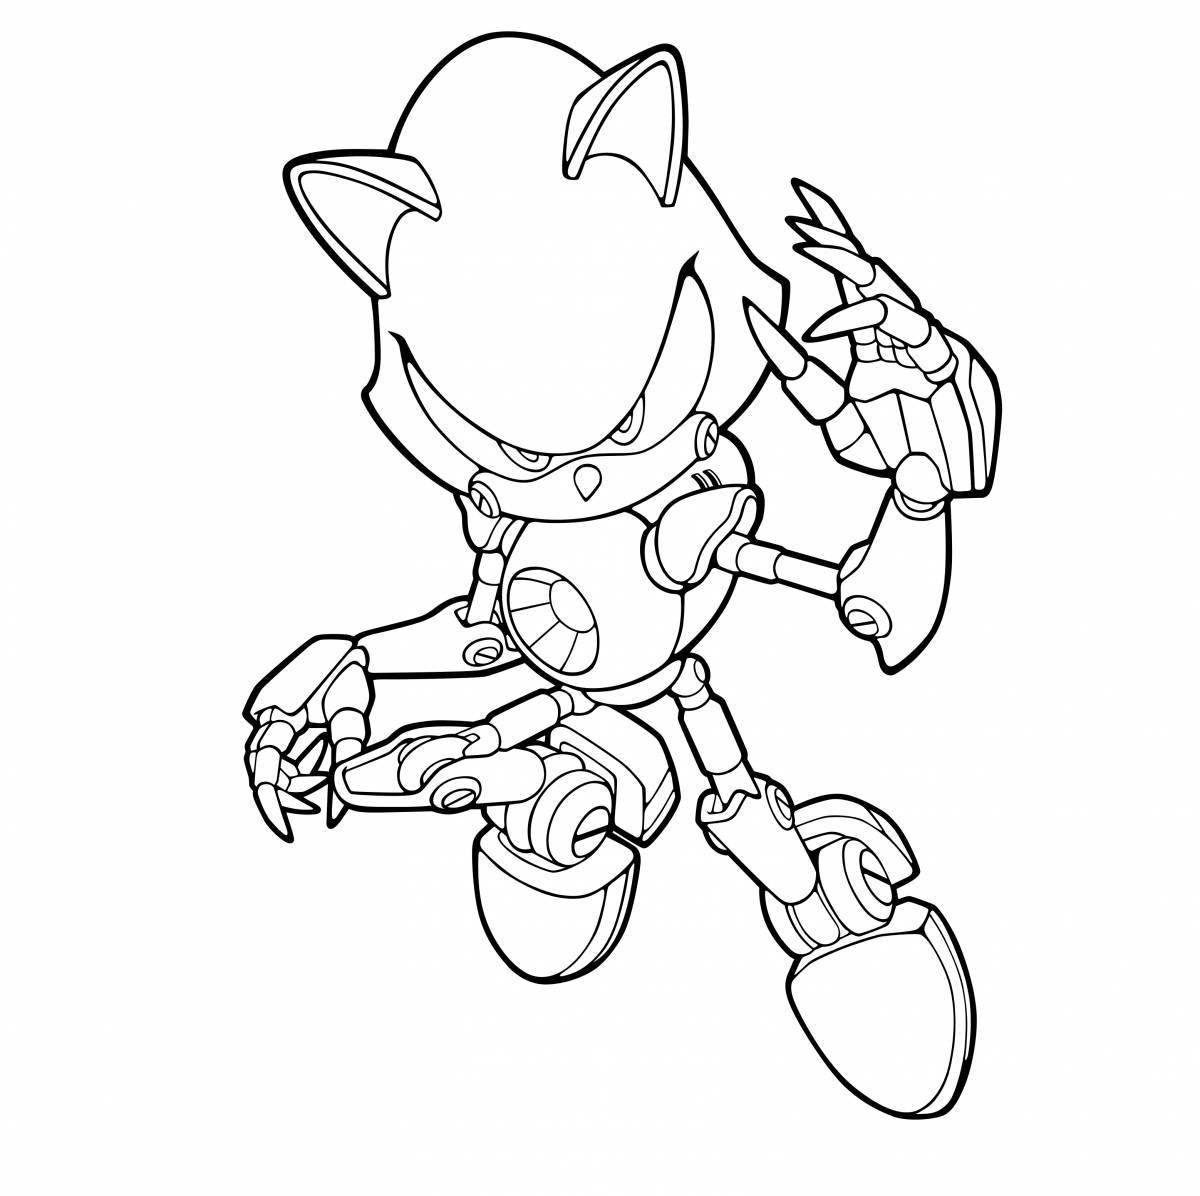 Majestic sonic metal coloring page